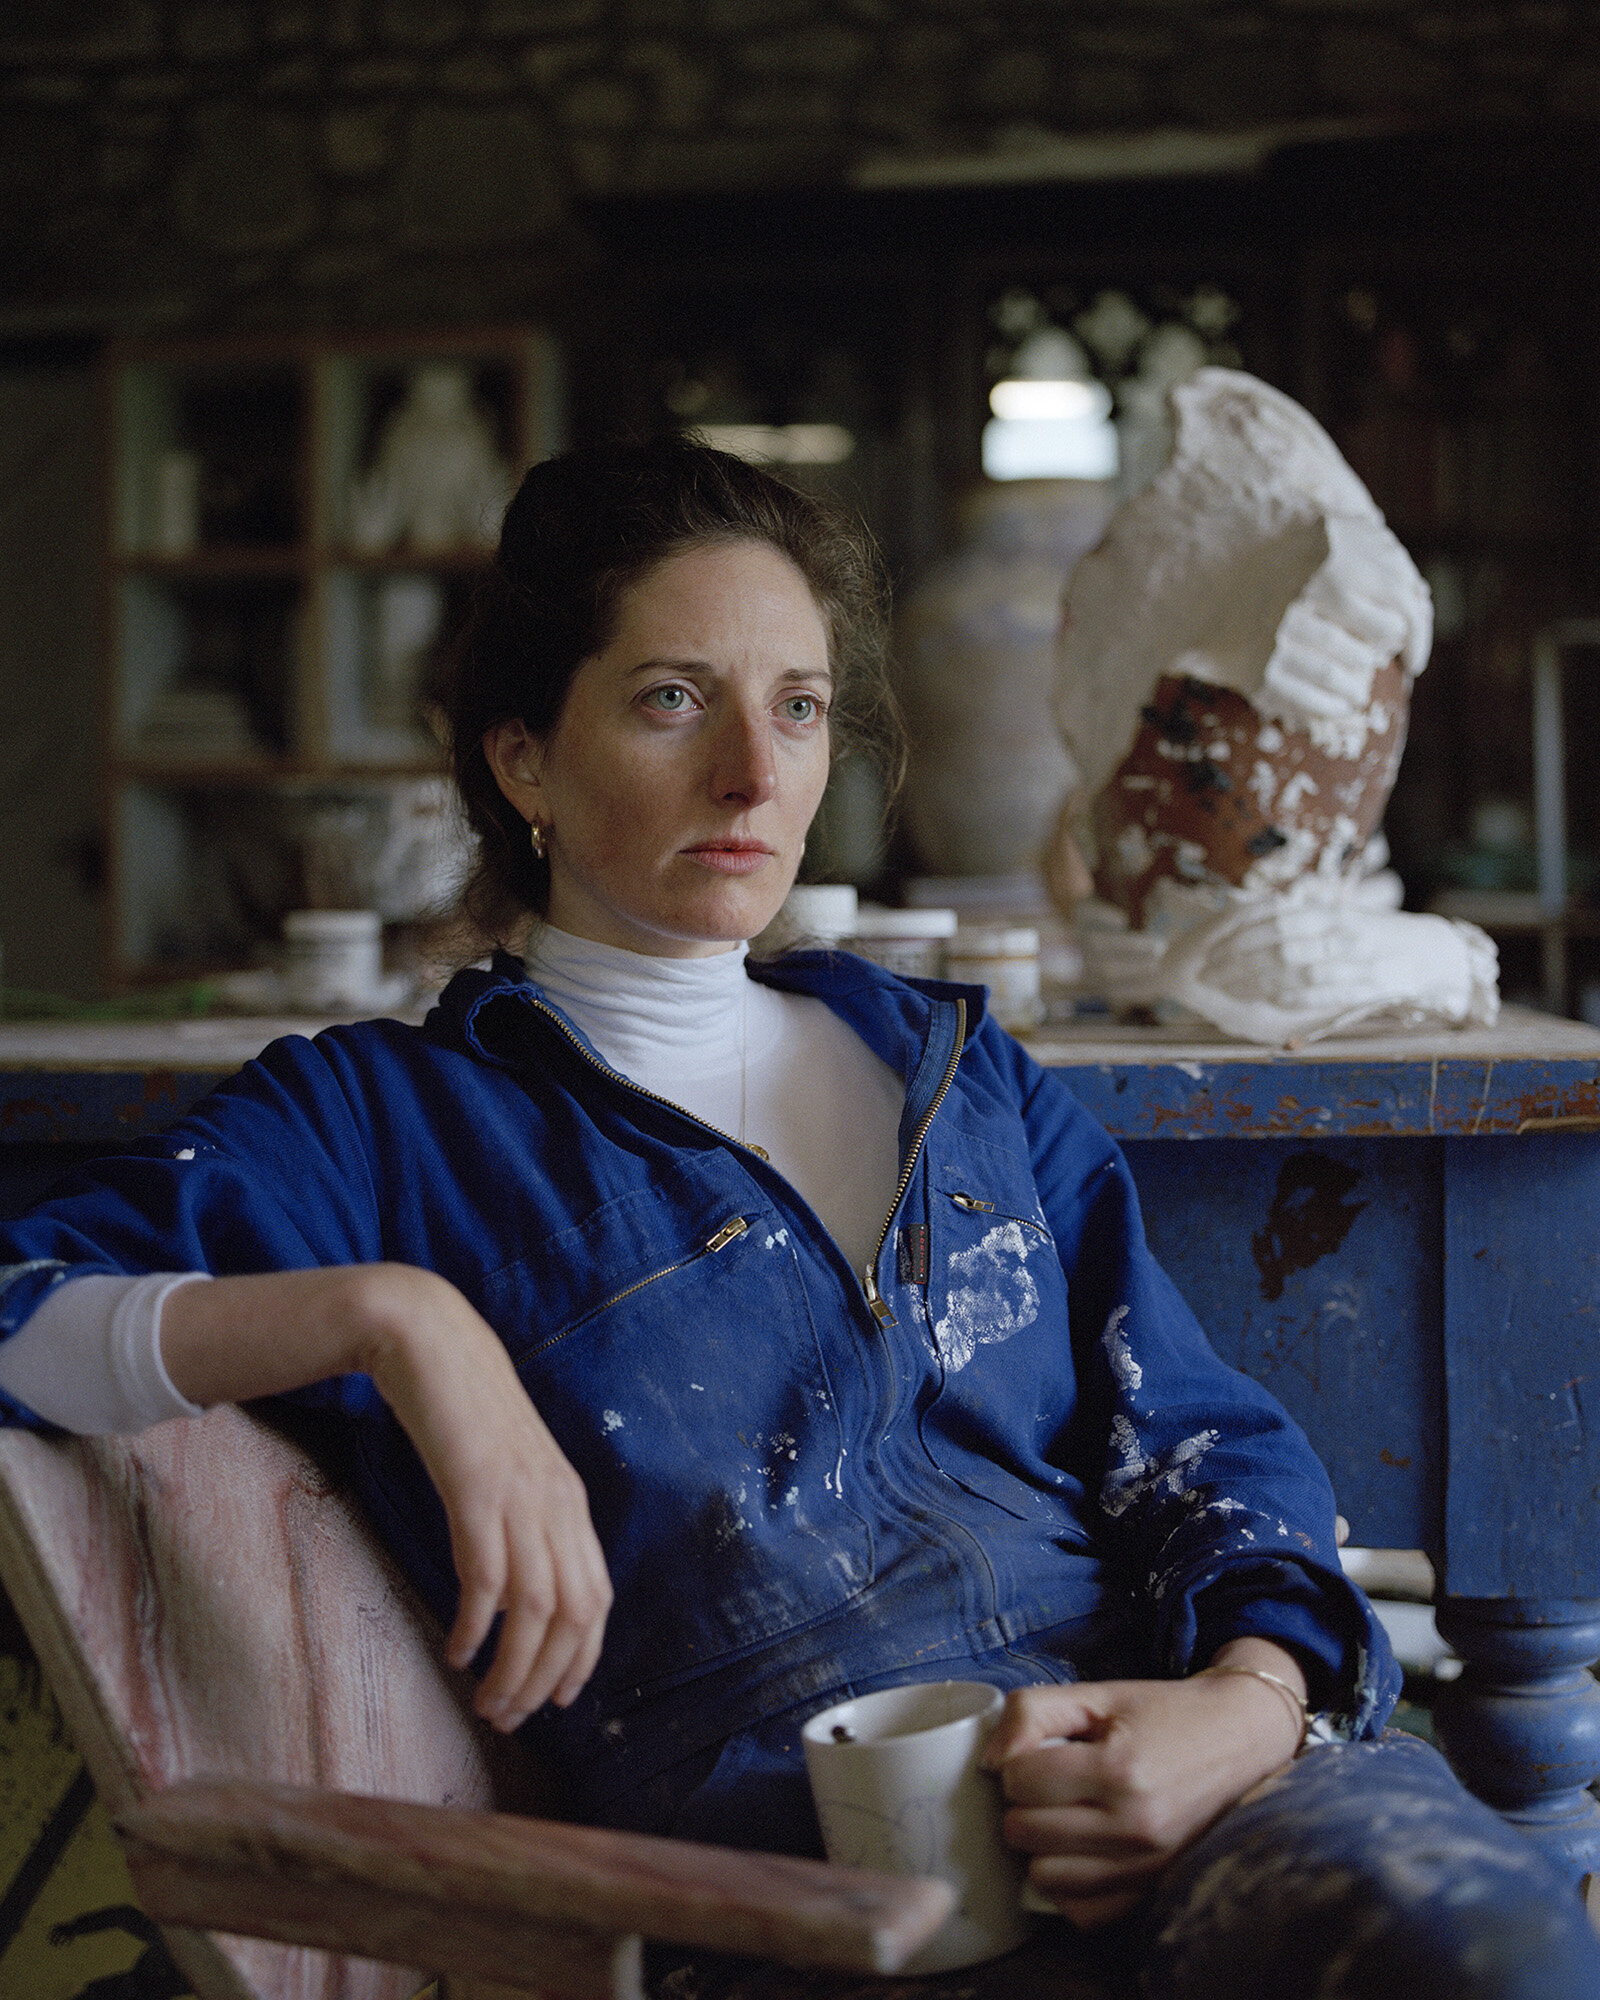 Clementine Keith-Roach in her studio for The Financial Times.